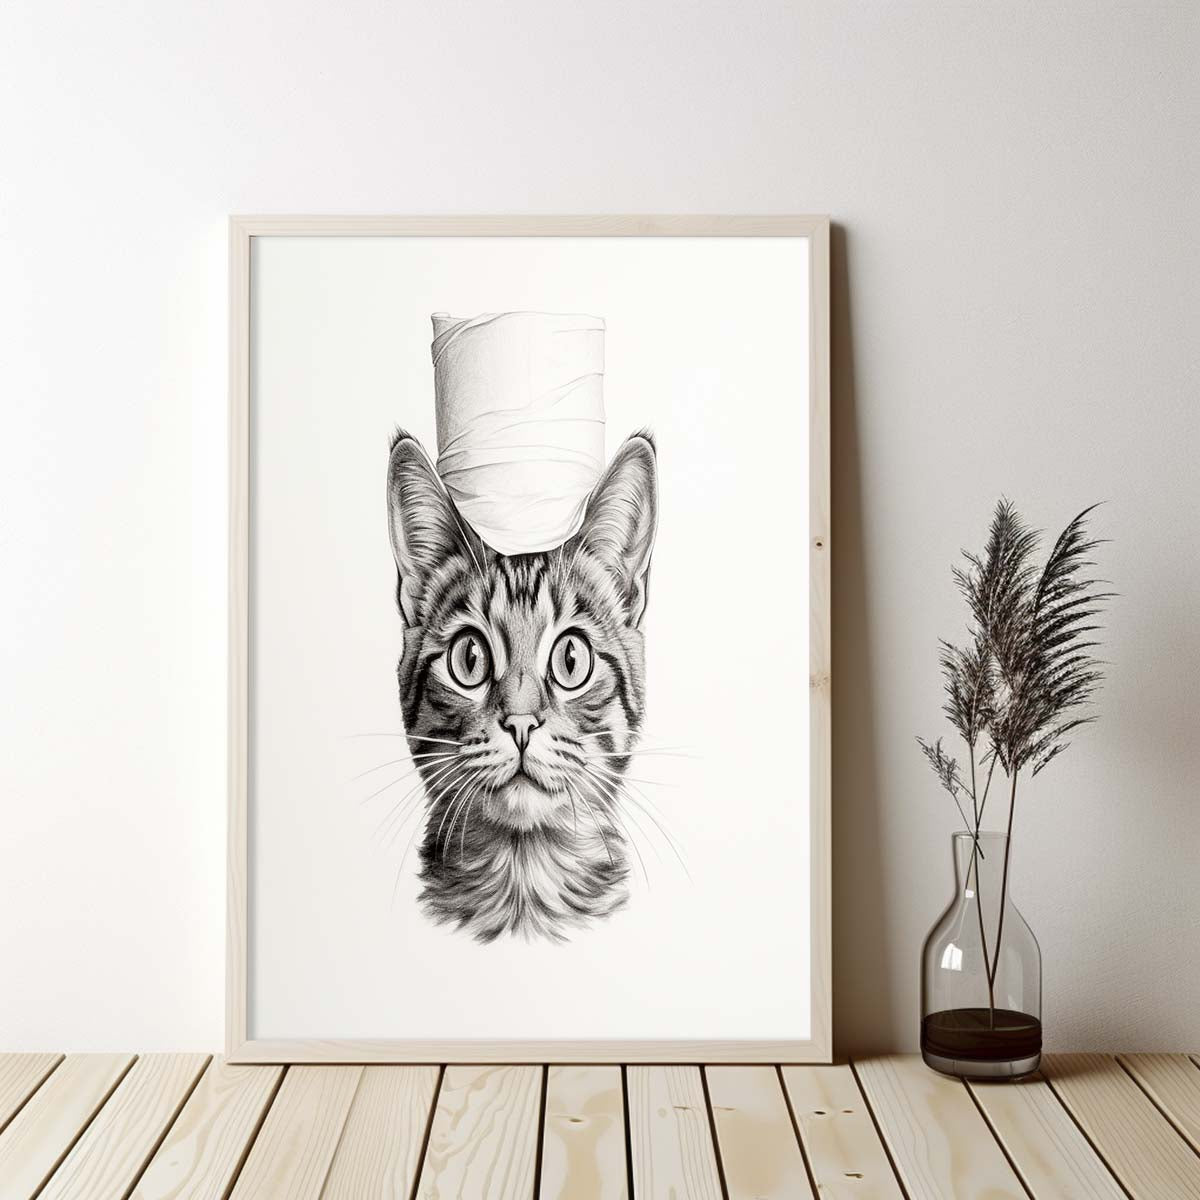 Cute Cat With Toilet Paper, Canvas Or Poster, Funny Cat Art, Bathroom Wall Decor, Home Decor, Bathroom Wall Art, Cat Wall Decor, Animal Decor, Pet Gift, Pet Illustration, Digital Download